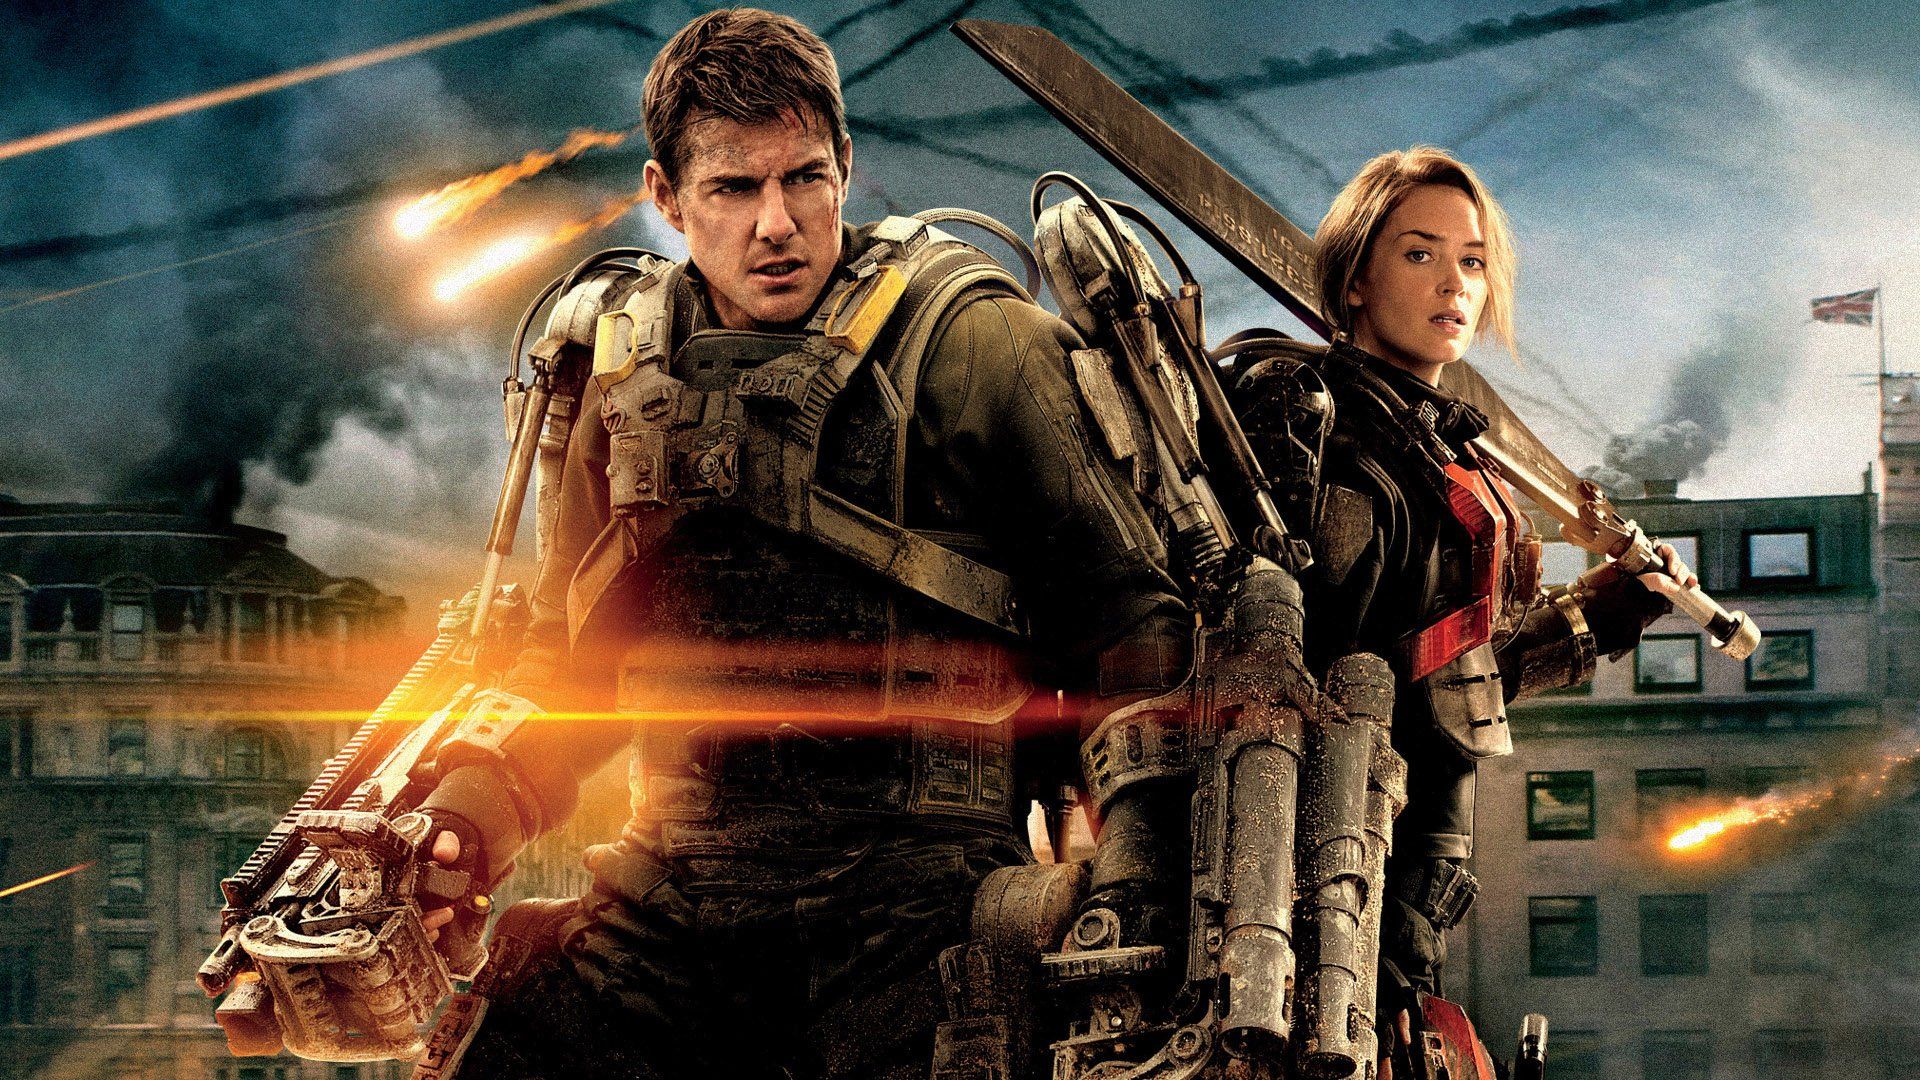 Tom Cruise and Emily Blunt in futuristic exoskeleton with a destroyed city in the backdrop, Edge of Tomorrow, 2014